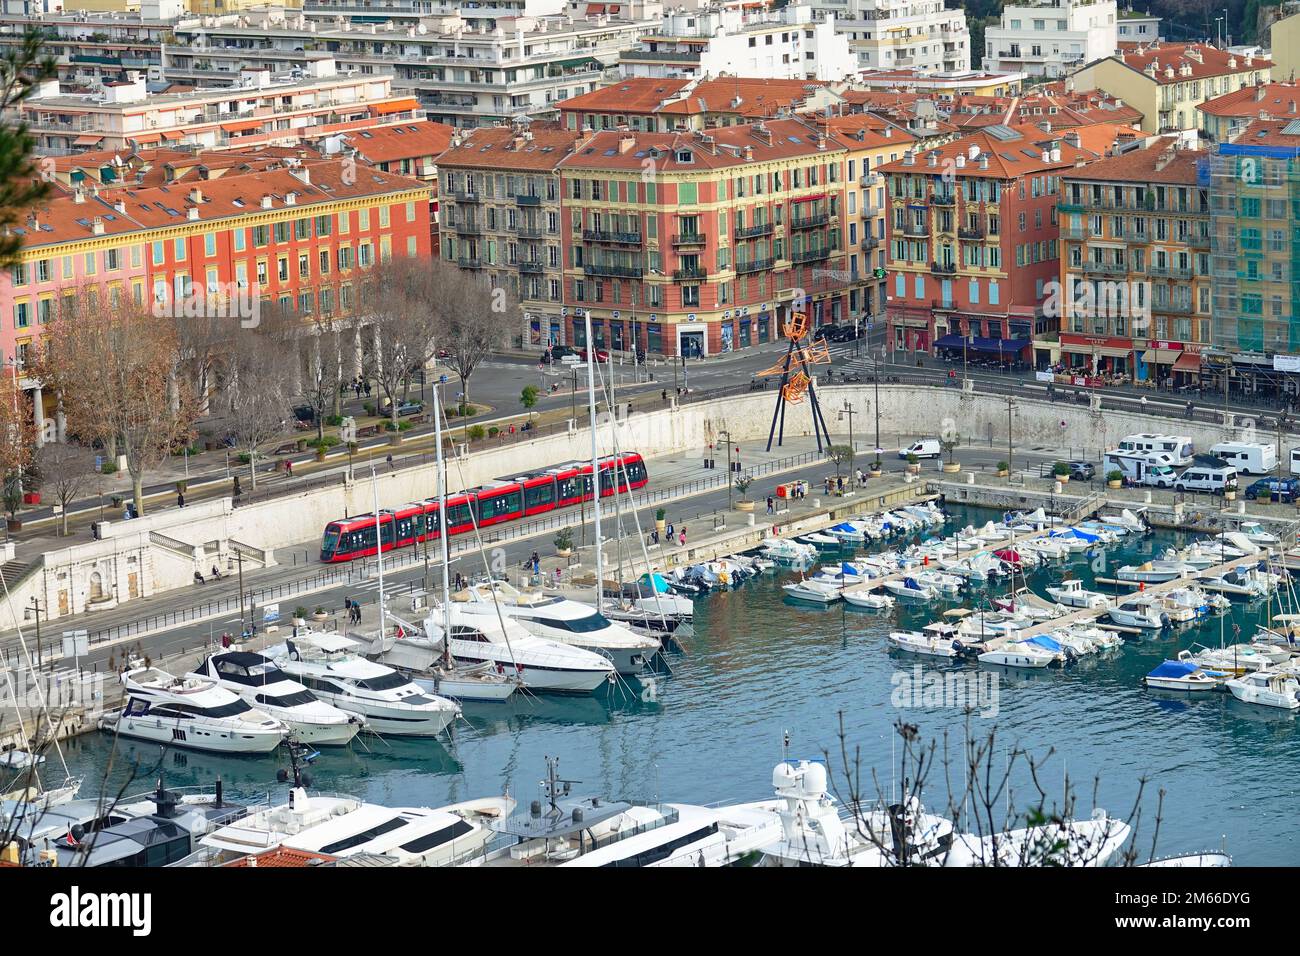 Port du Nice (Nice's port) as seen from above in La Colline du Chateau in Nice, France. Stock Photo